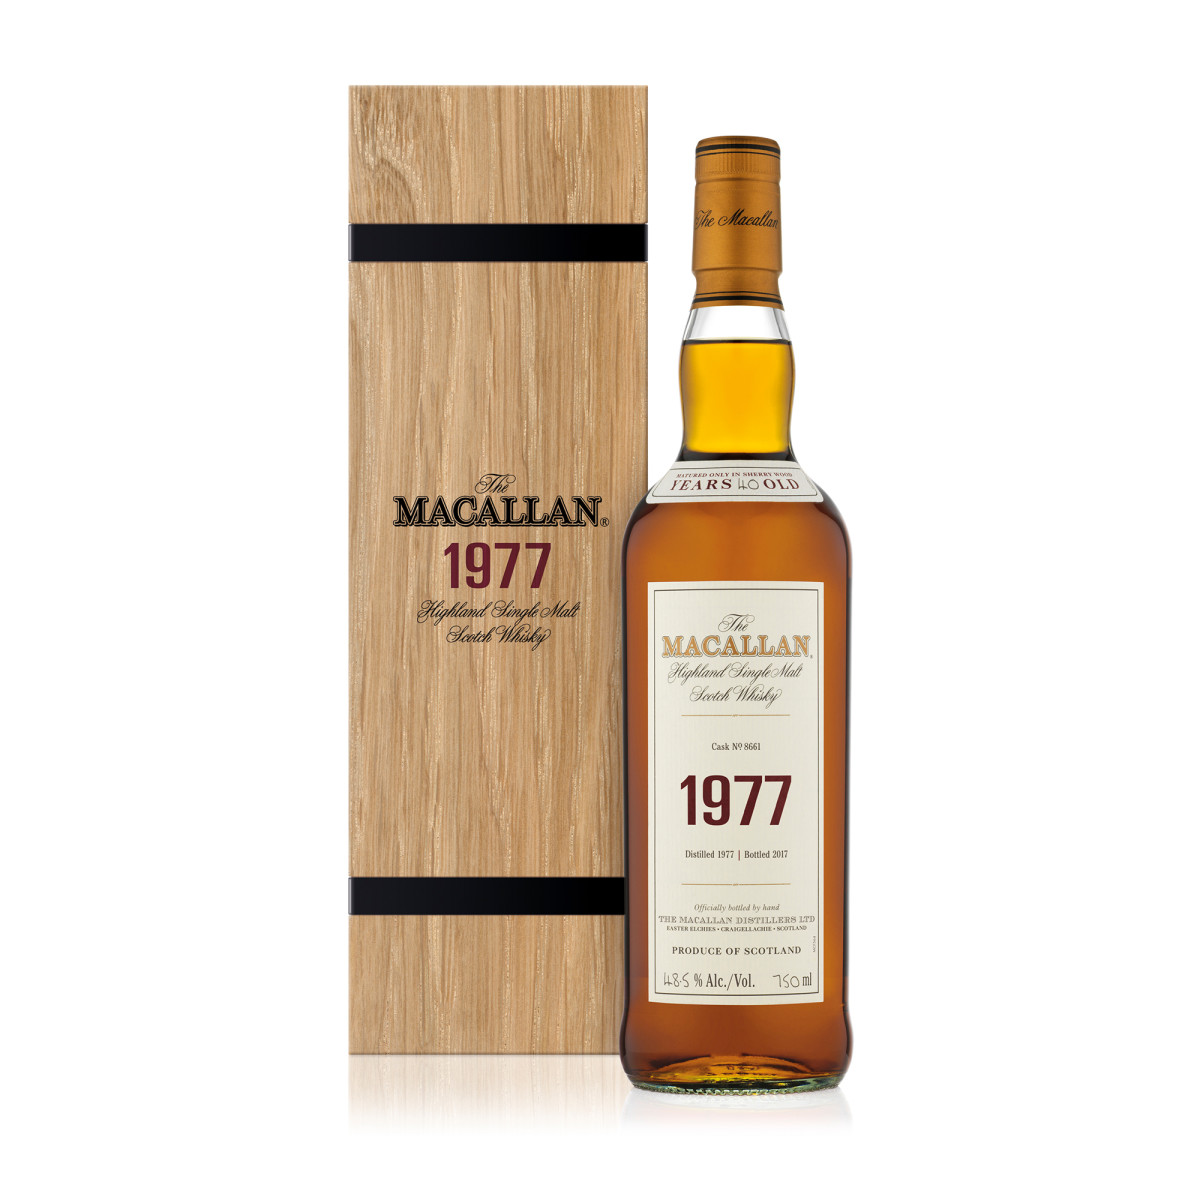 The Macallan 1977 Rare and Vintage